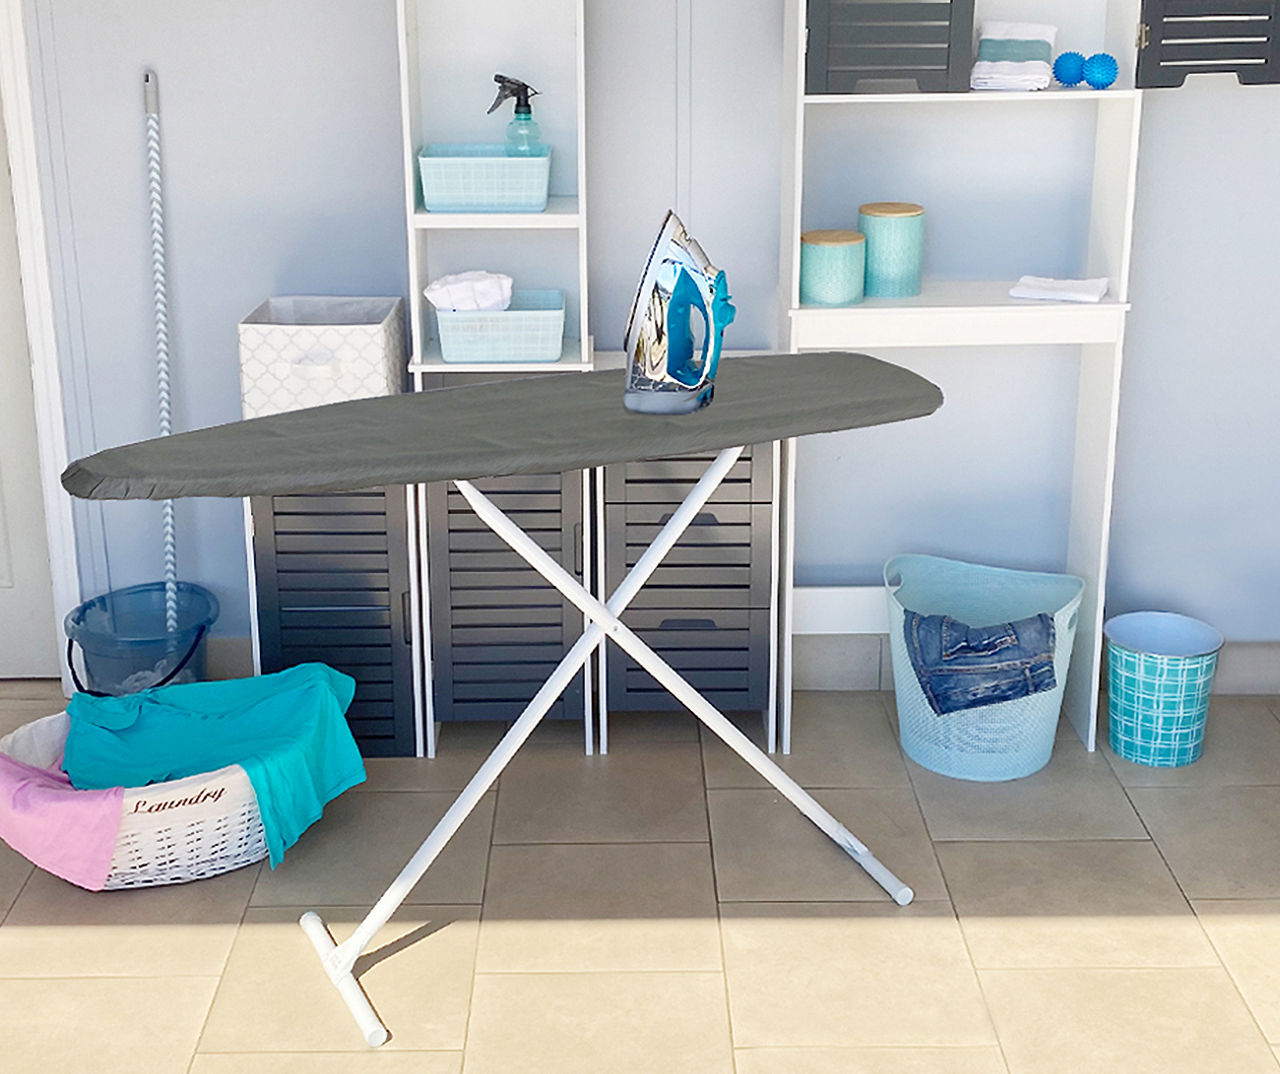 Mini Ironing Board with Folding Legs Ironing Table for Dorm